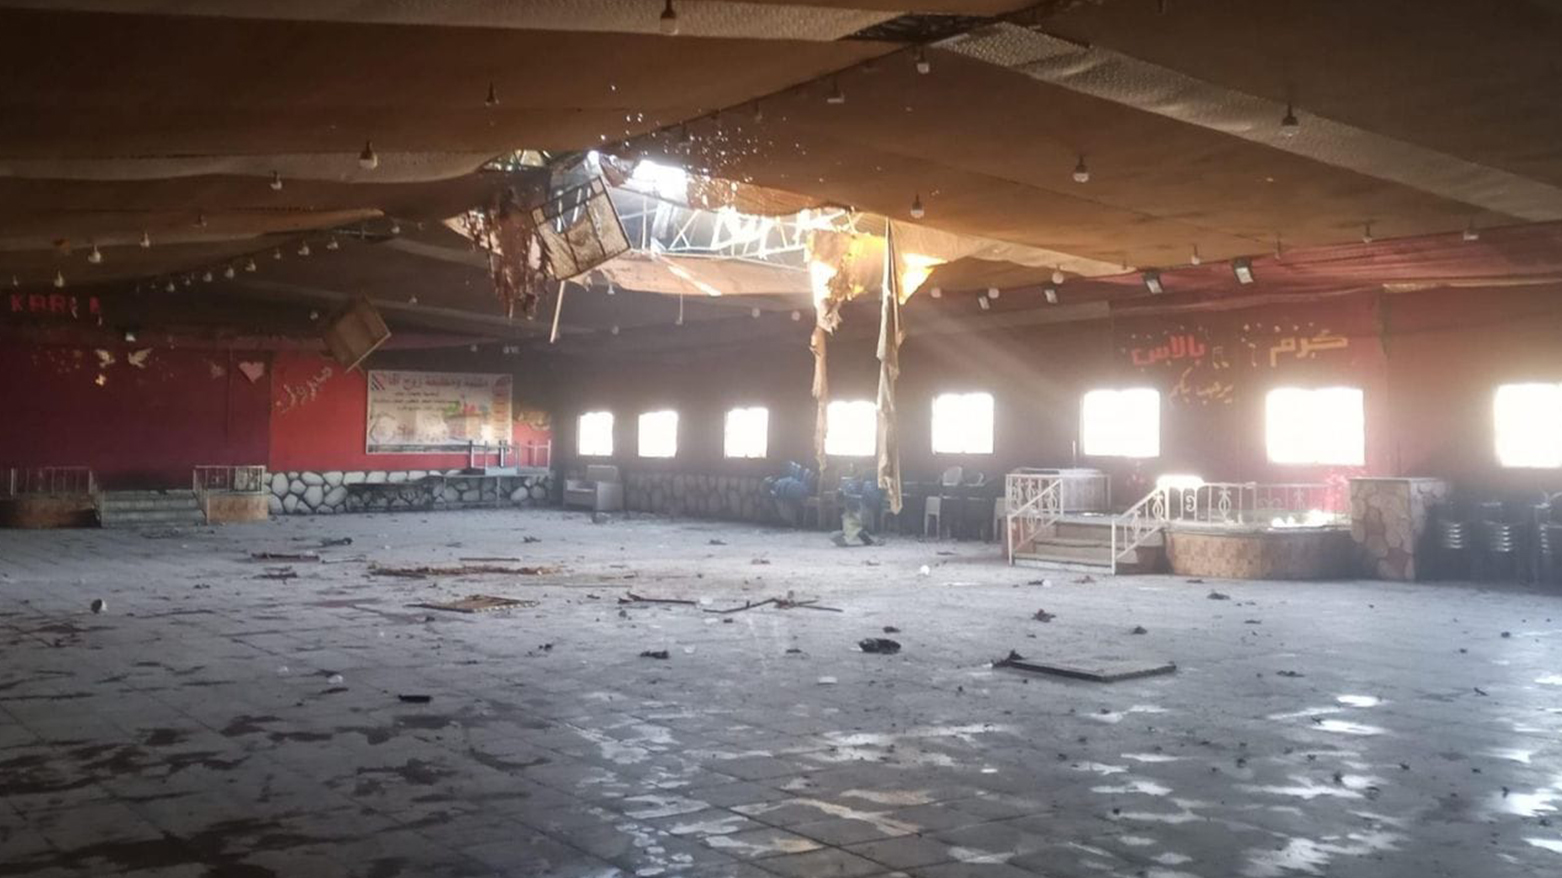 A wedding hall in Amude was also targeted (Photo: social media)